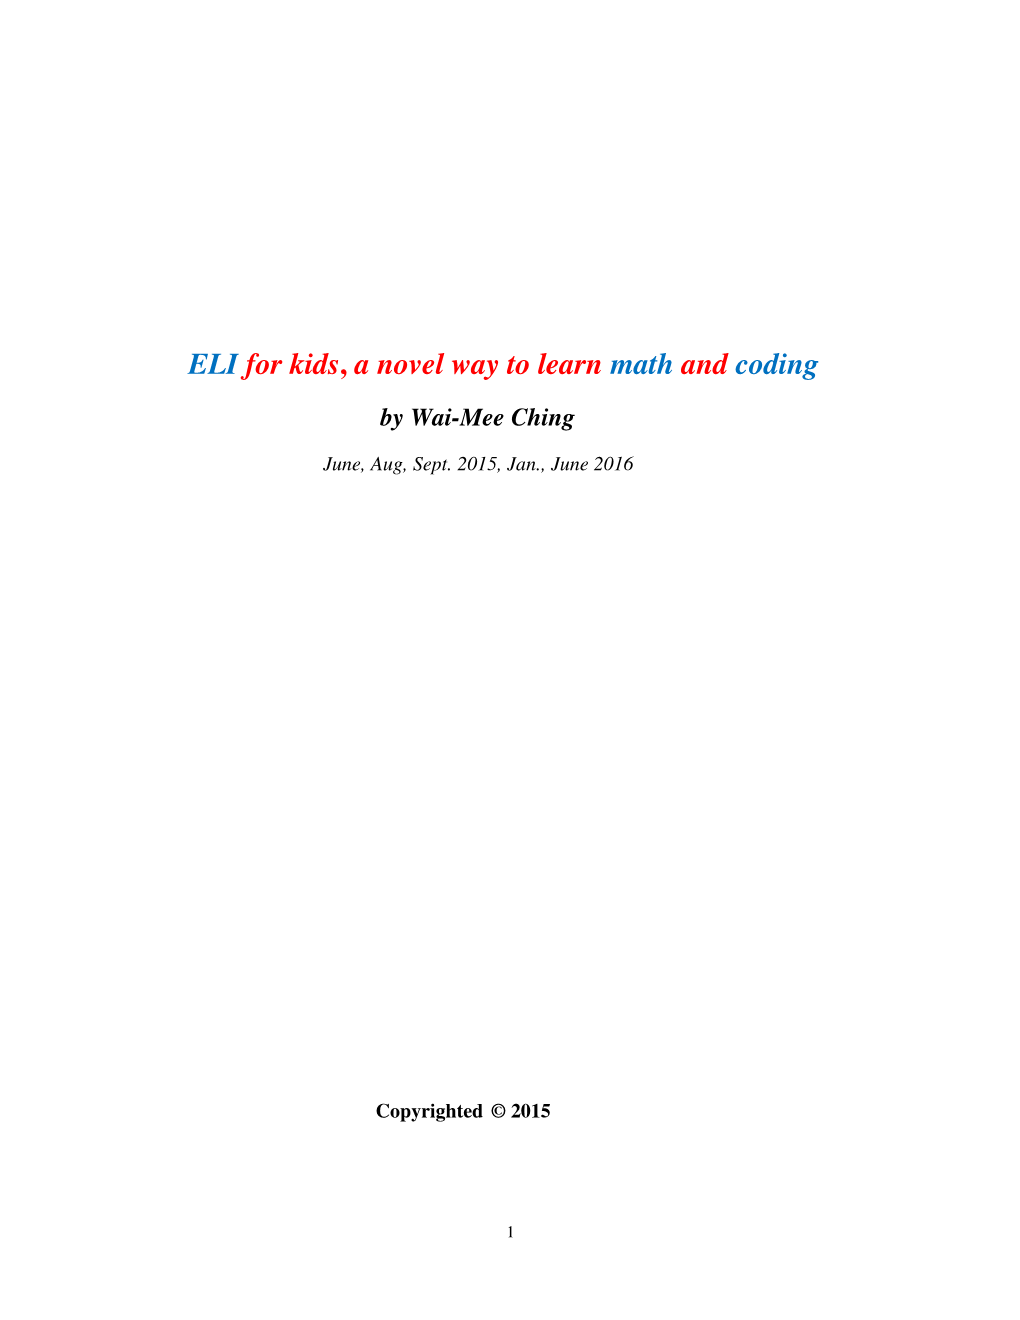 ELI for Kids, a Novel Way to Learn Math and Coding